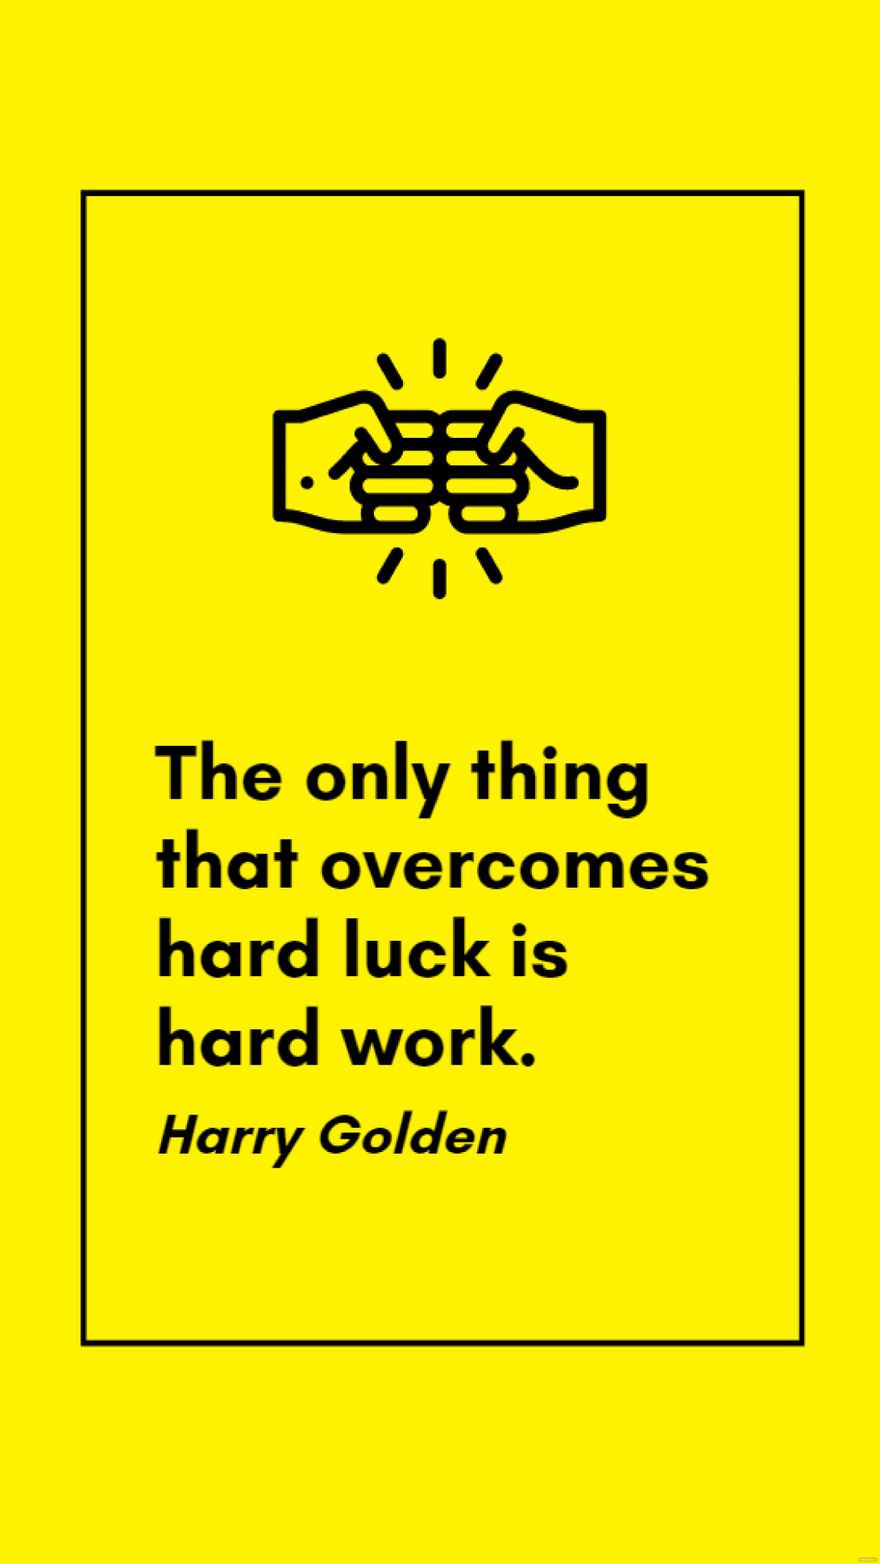 Free Harry Golden - The only thing that overcomes hard luck is hard work. in JPG